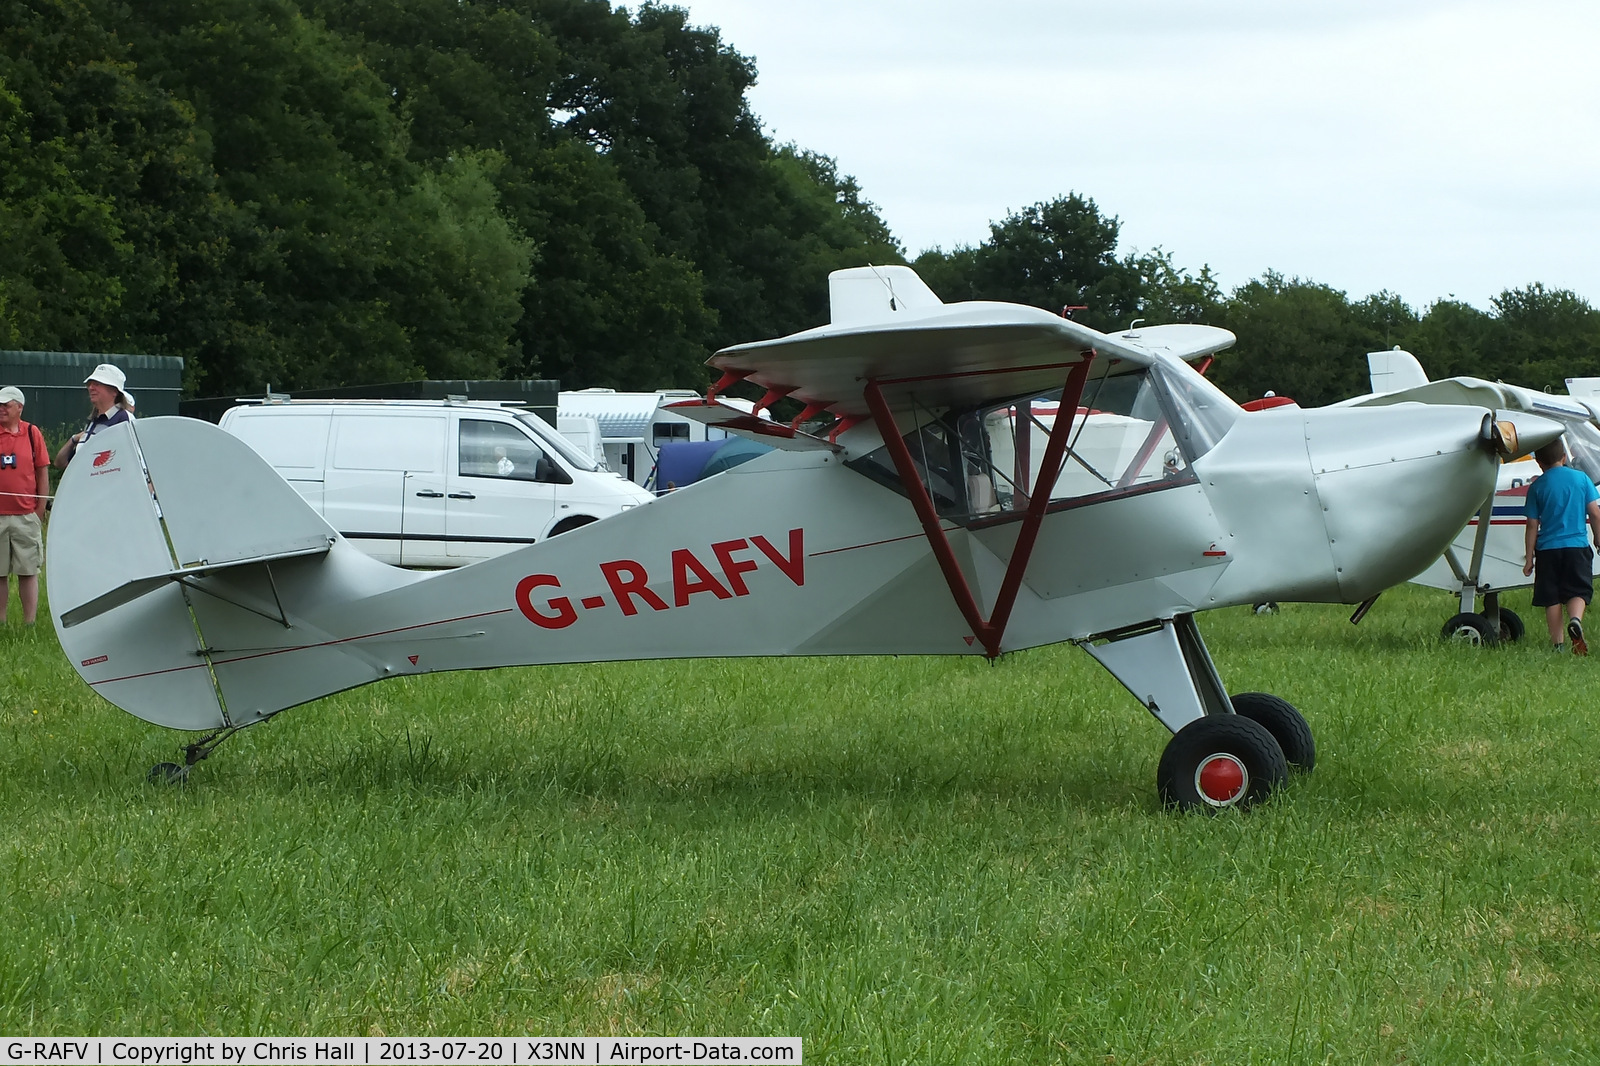 G-RAFV, 1992 Avid Speedwing C/N PFA 189-11738, at the Stoke Golding stakeout 2013